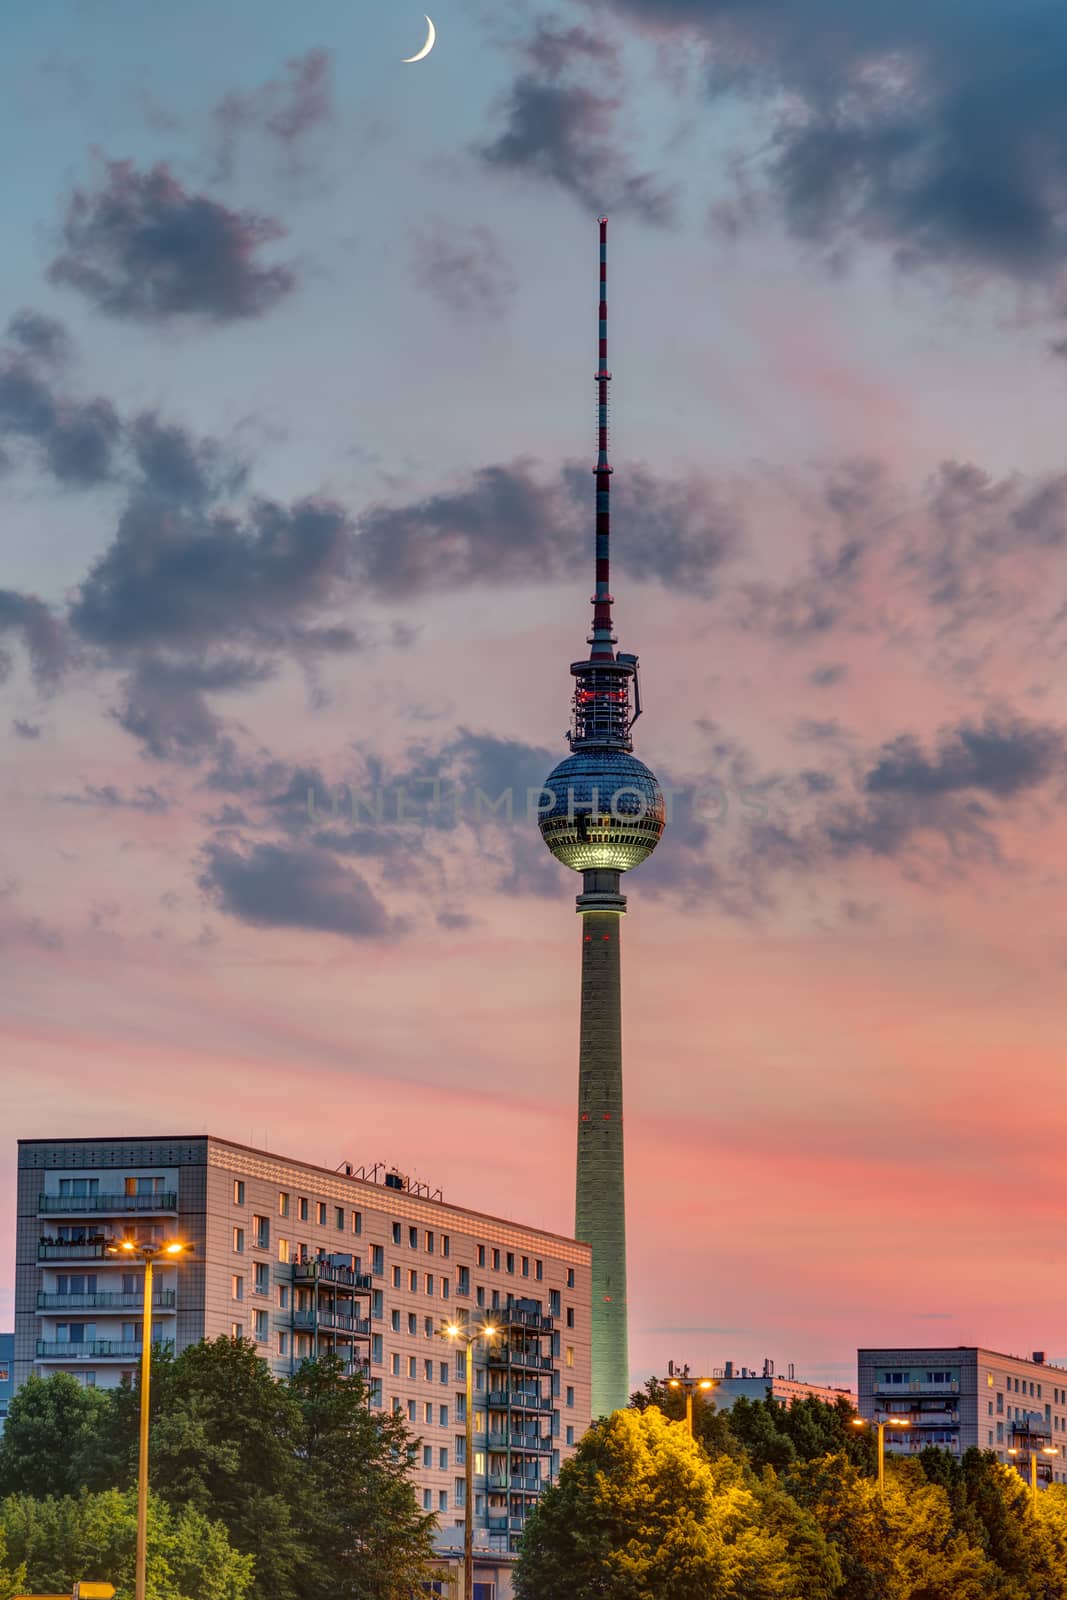 Dramatic sunset at the Television Tower in Berlin